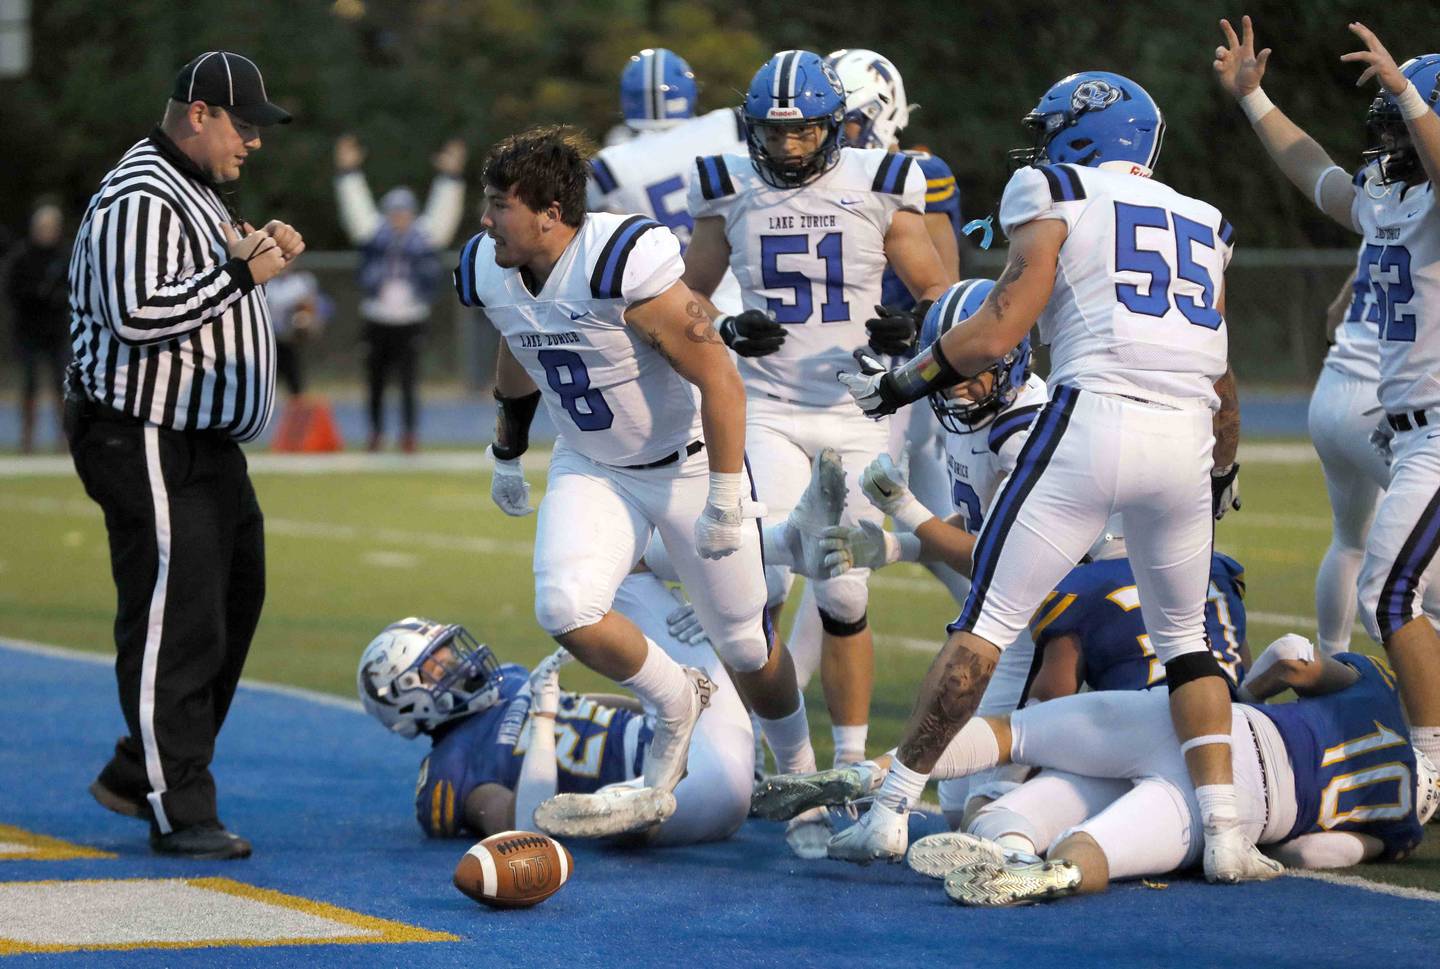 Brian Hill/bhill@dailyherald.com
Lake Zurich's Calen Grabowski (8) emerges from the pack after scoring against Wheaton North during the second round of the IHSA playoffs Saturday November 5, 2022 in Wheaton.